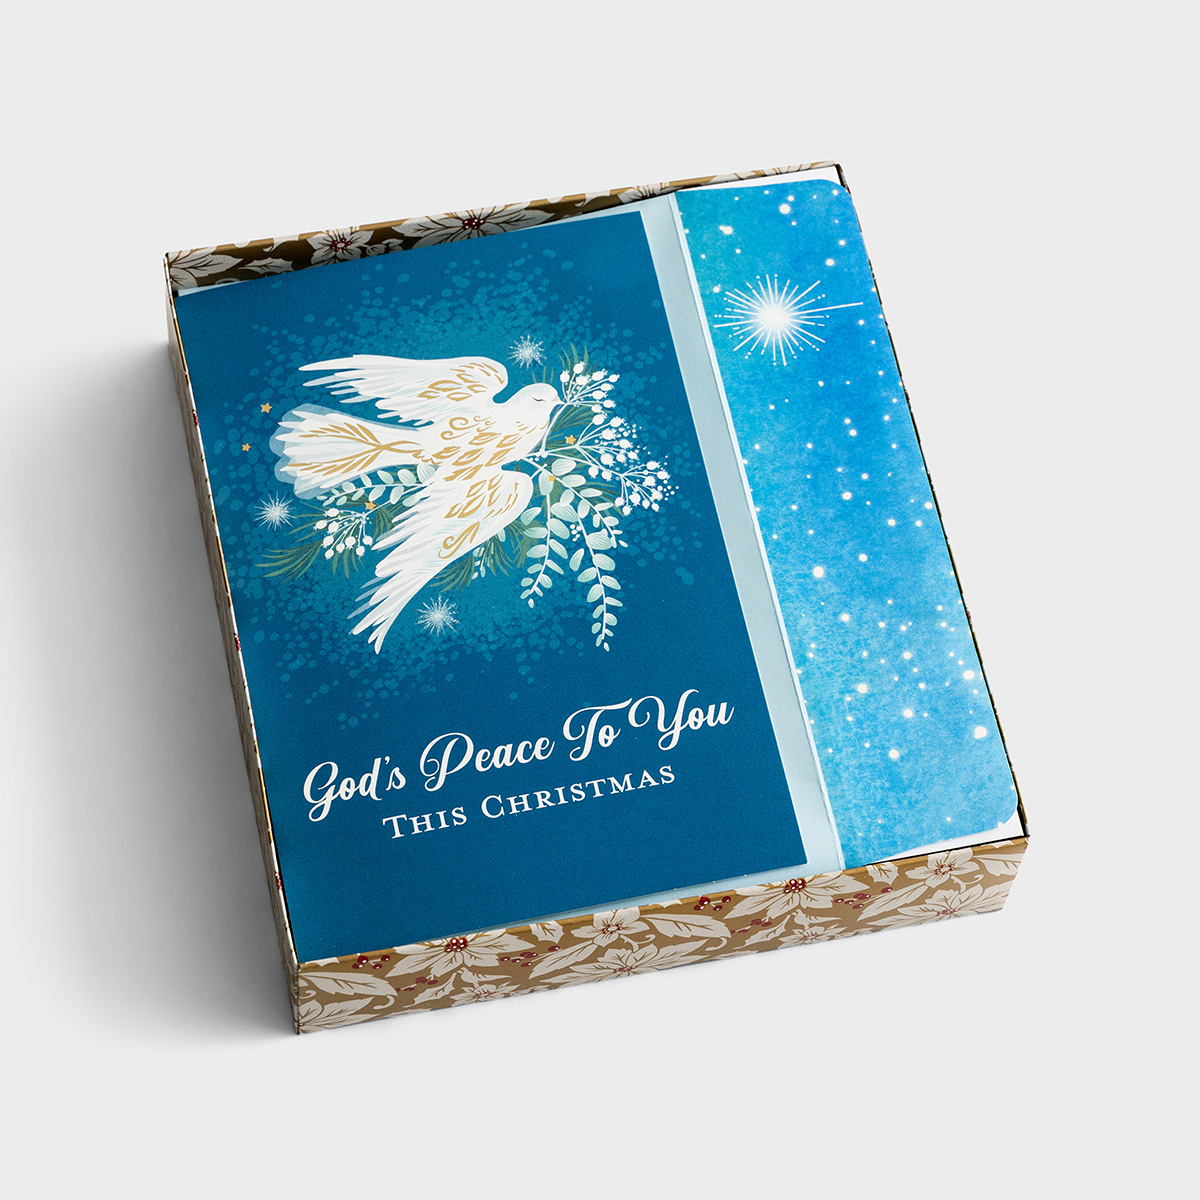 God's Peace to You This Christmas - Inspirational Christmas Cards - 18 Boxed Cards and Envelopes, KJV